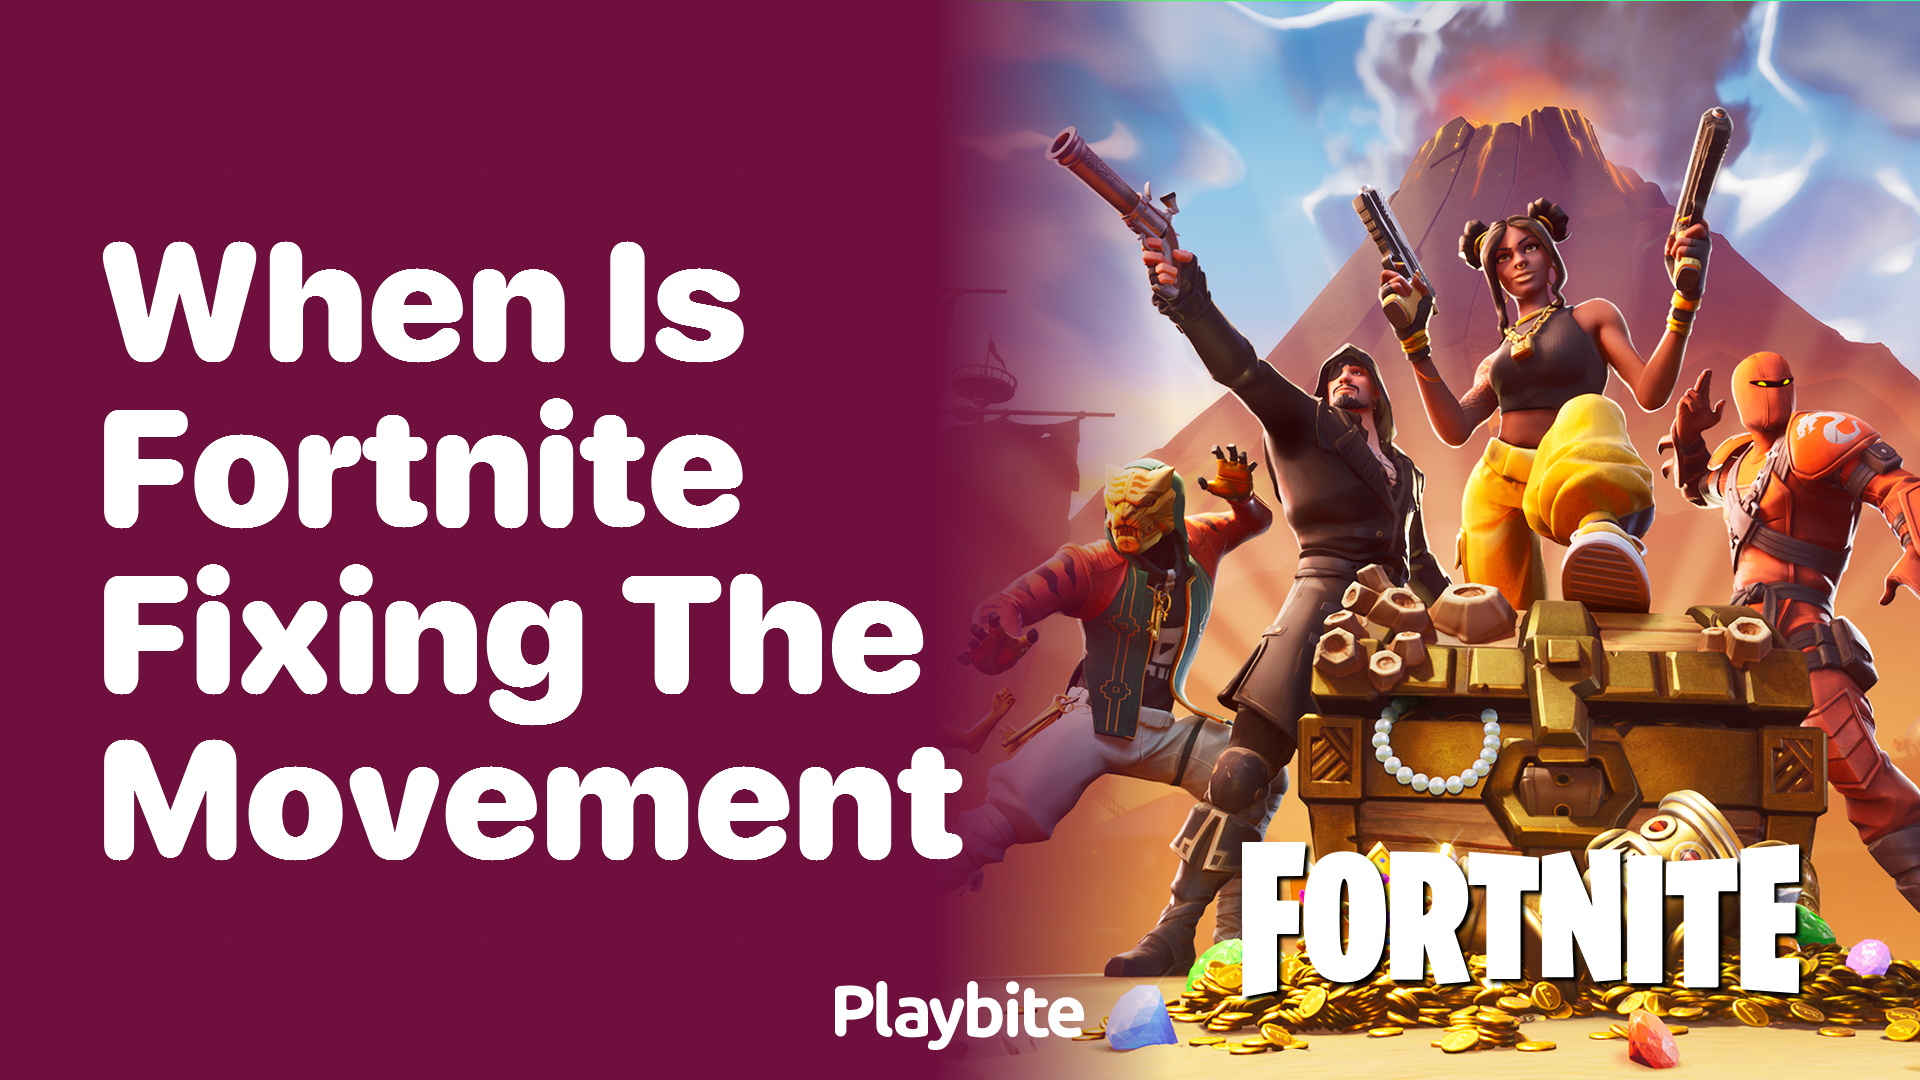 When is Fortnite Fixing the Movement?